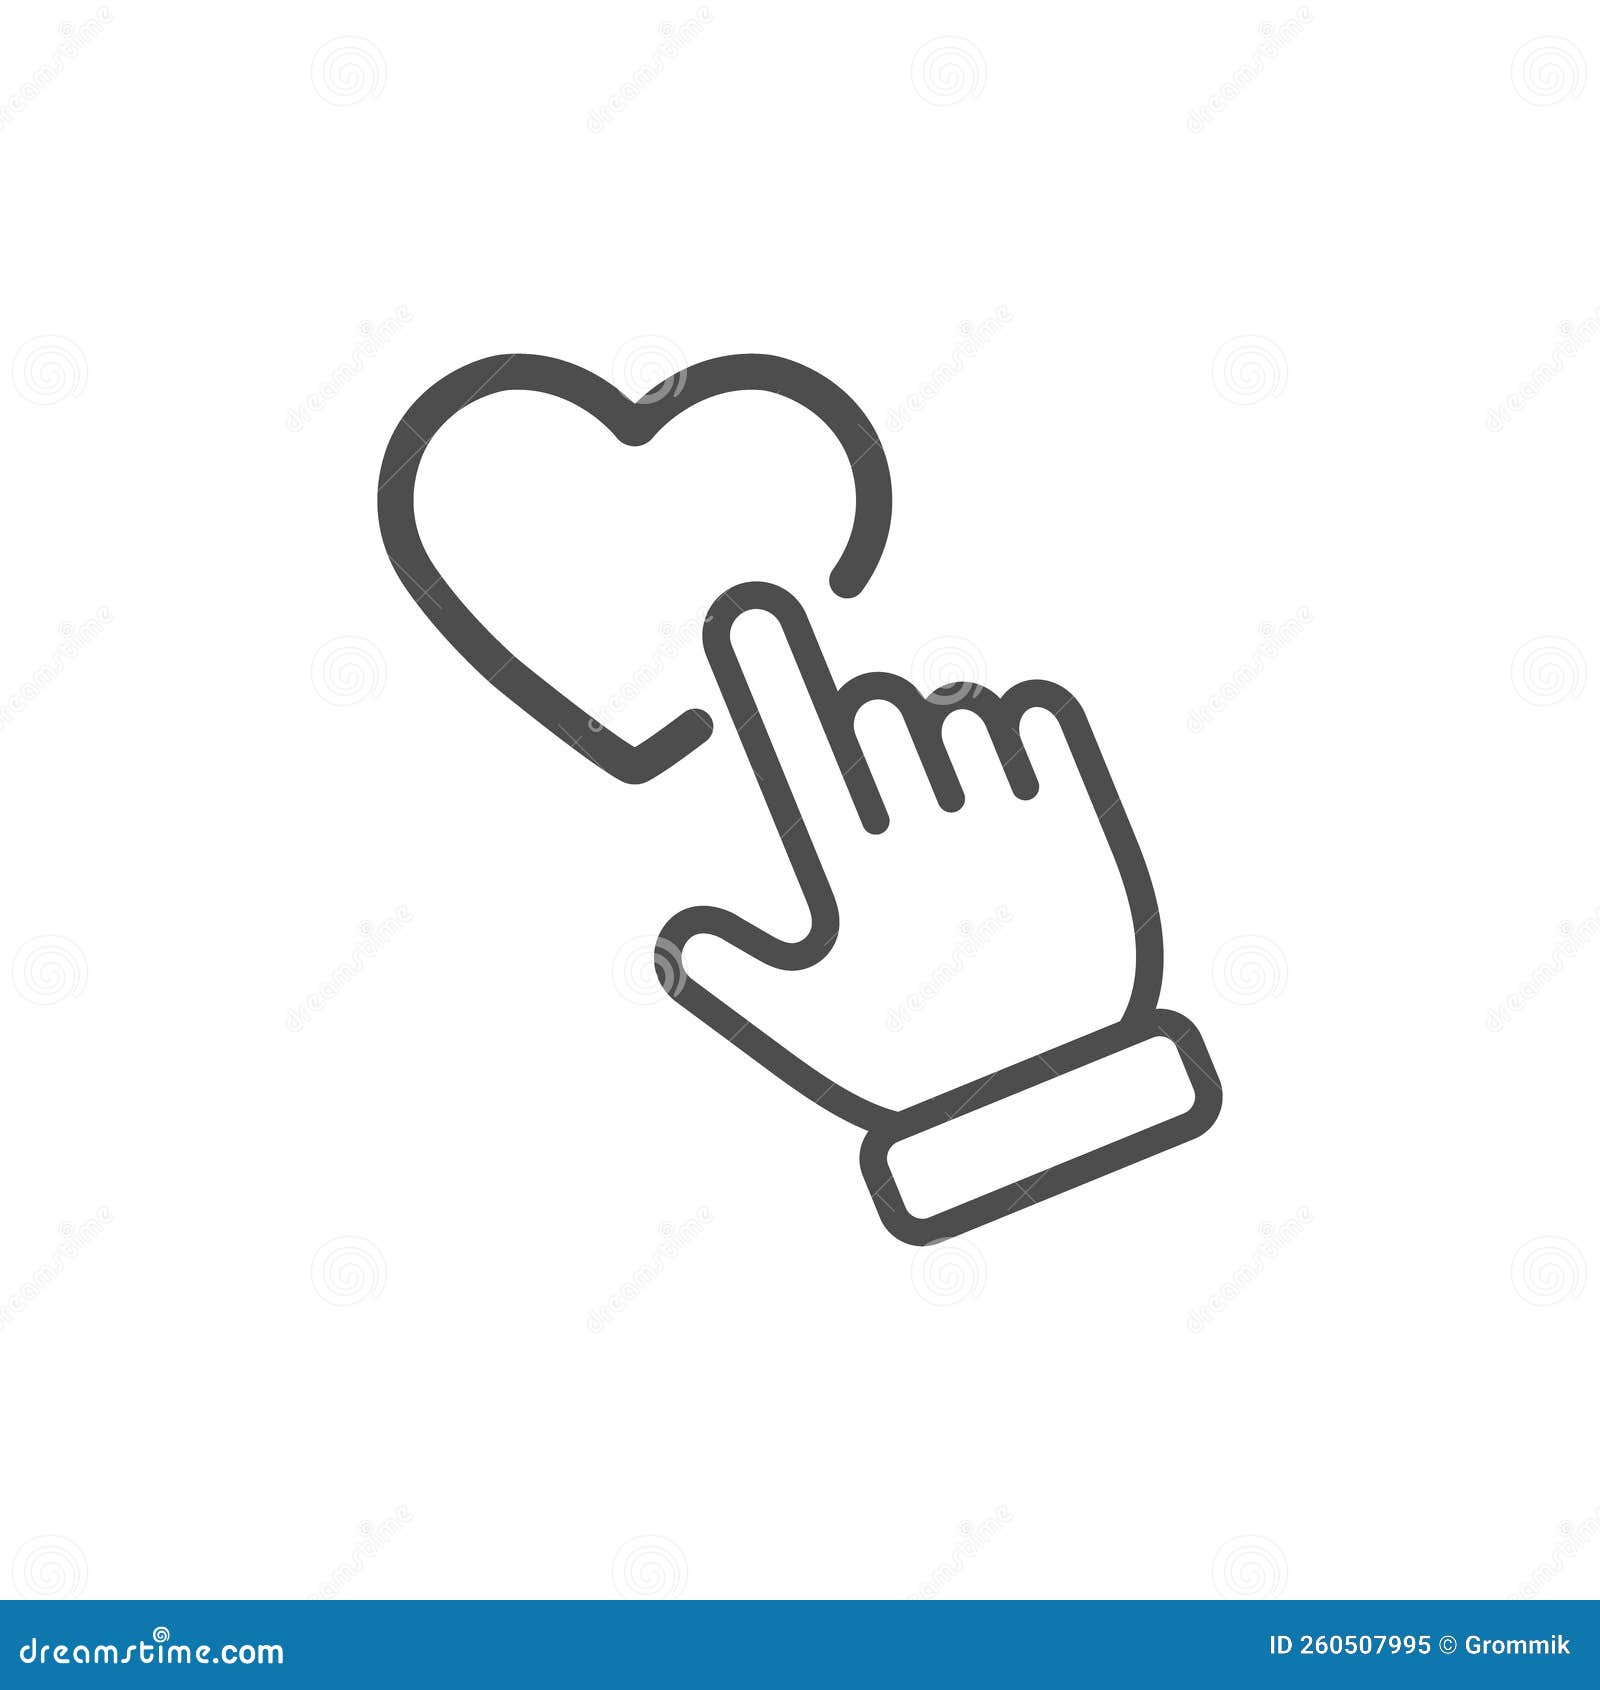 A Hand Click on the Heart Icon. the Hand Points To the Heart Symbol ...